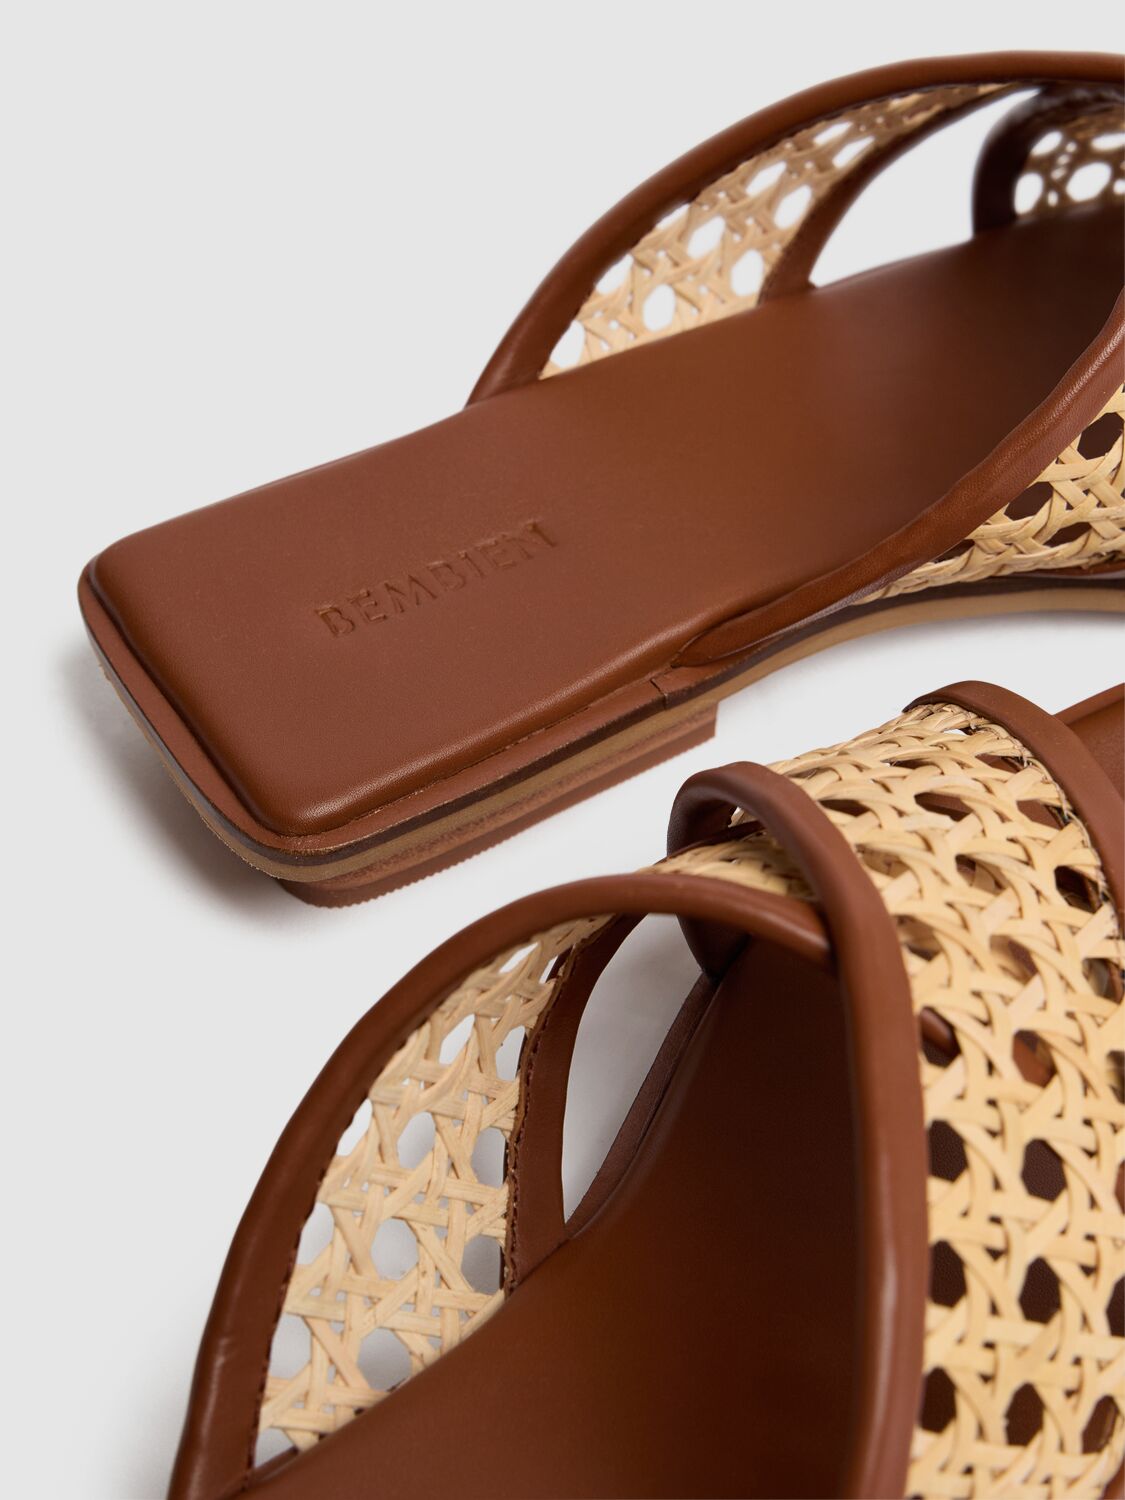 Shop Bembien 10mm Roma Leather & Rattan Slides In Brown